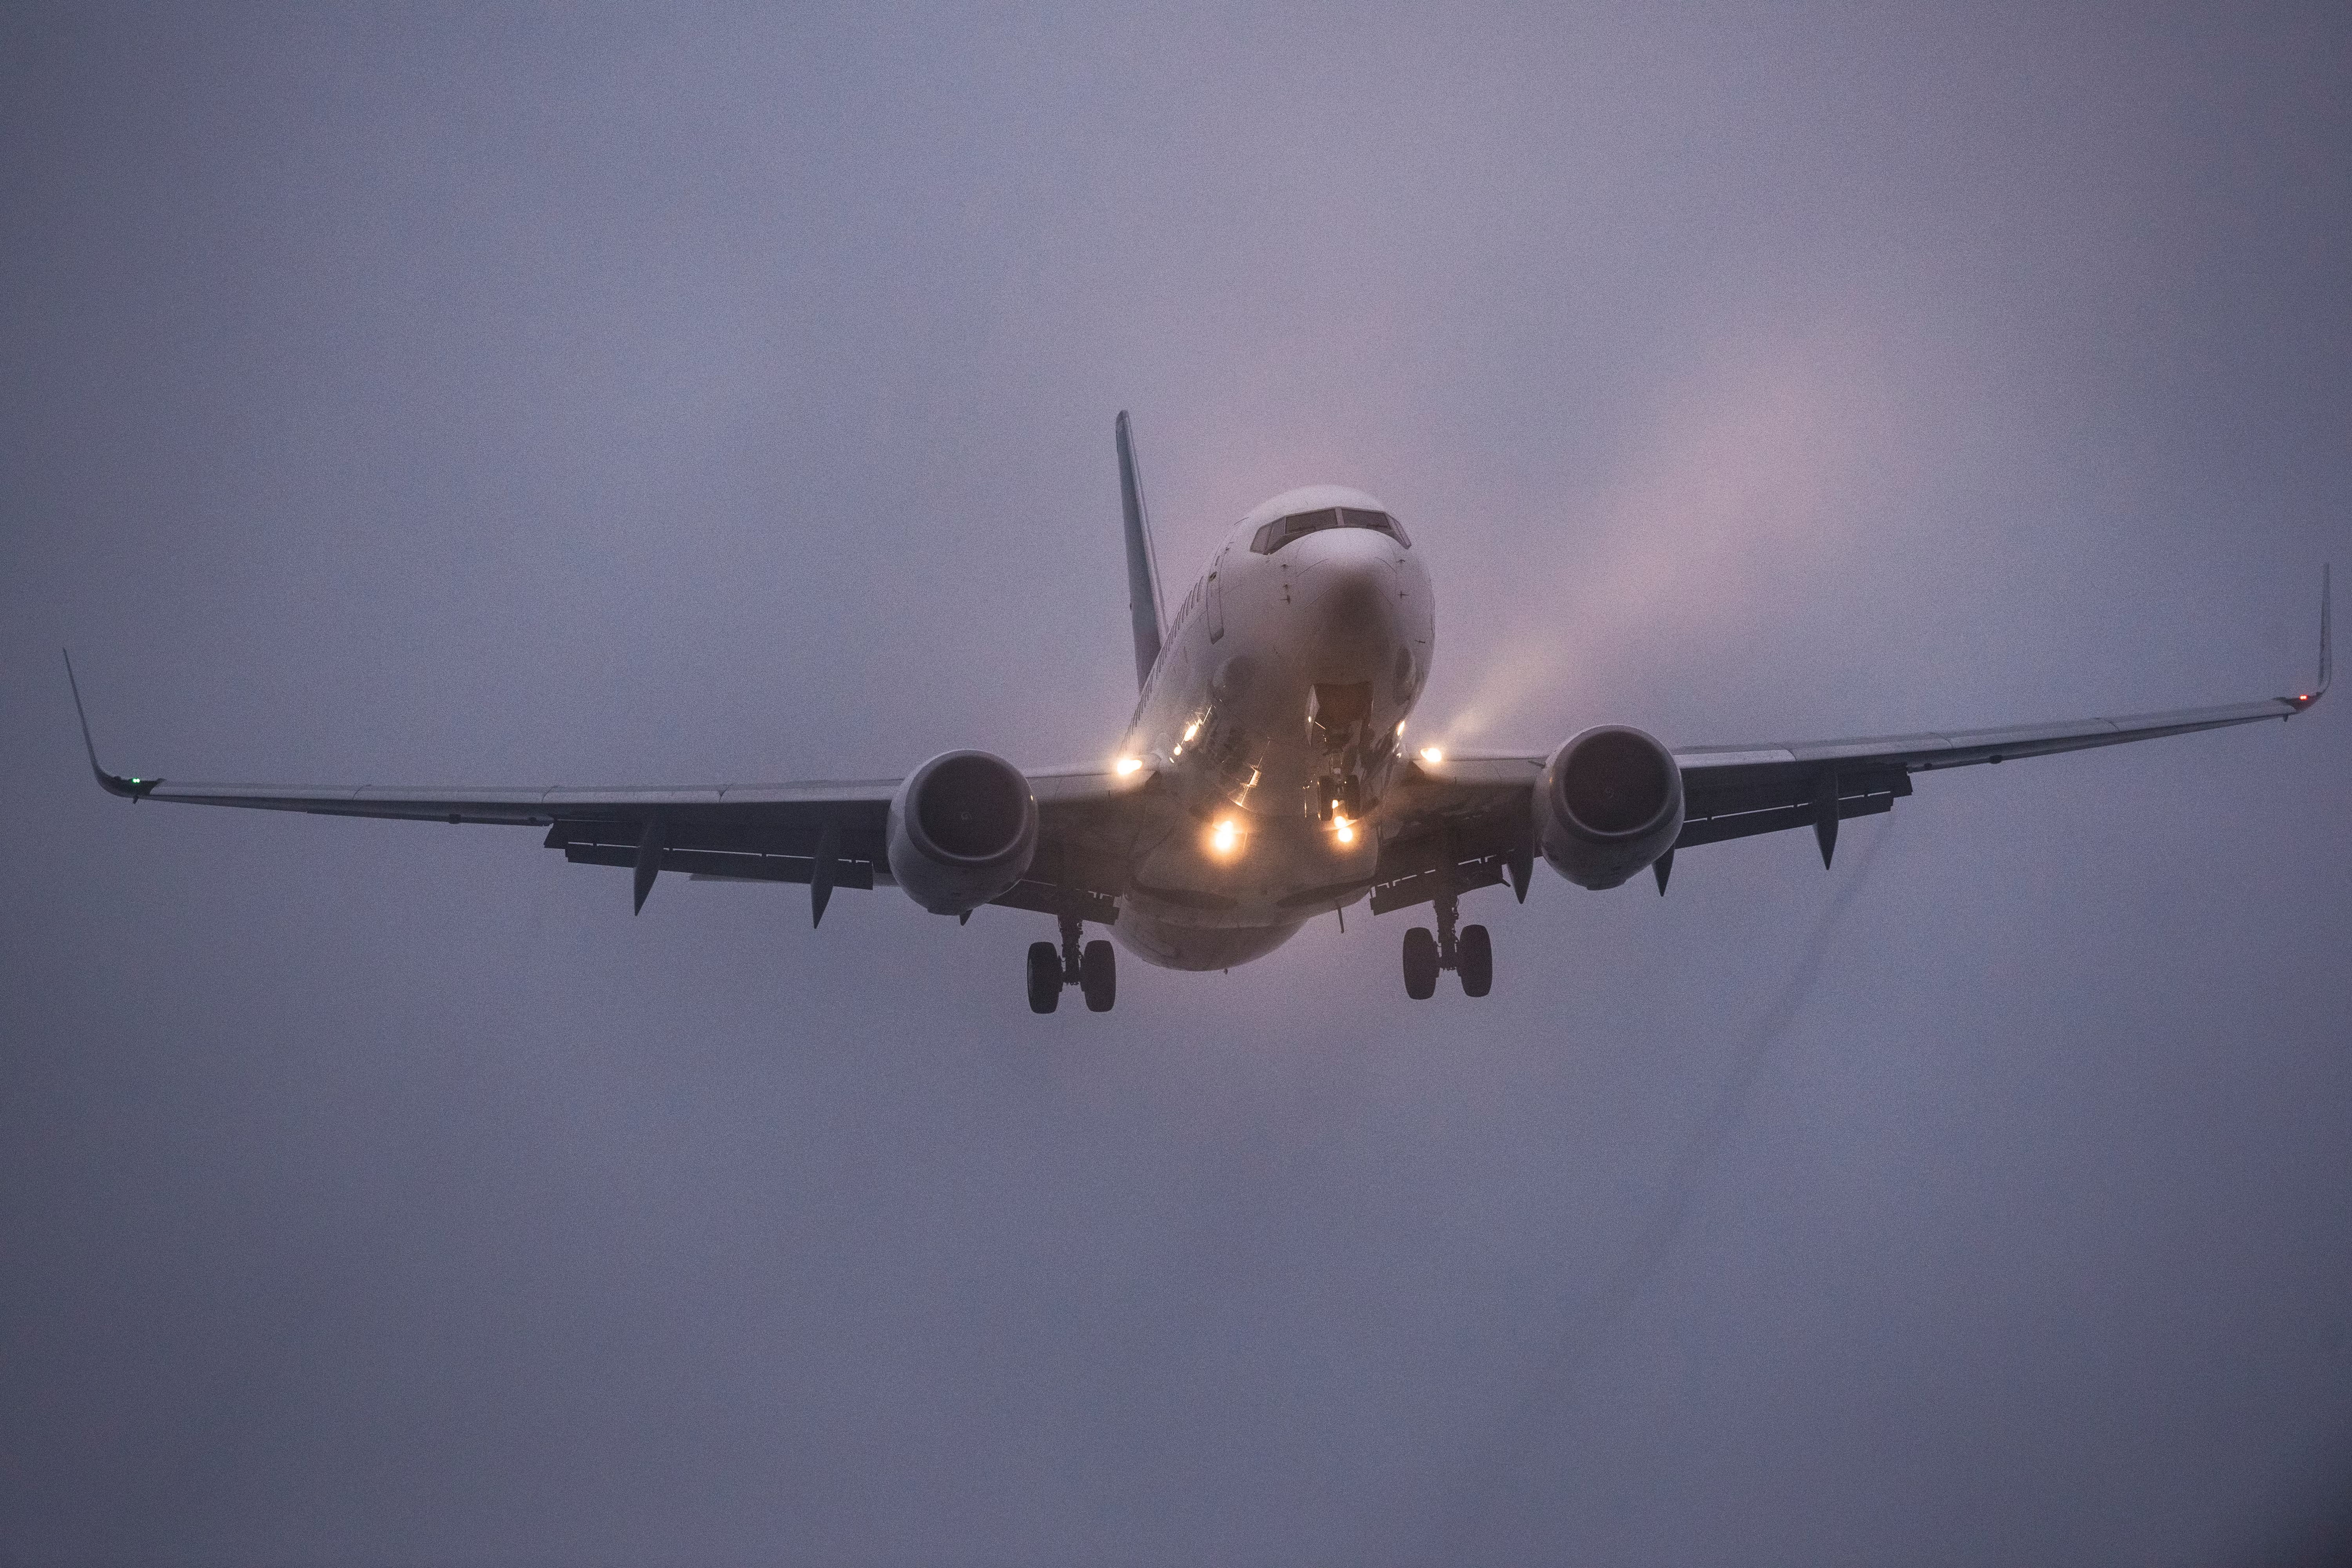 A Boeing 737 landing in foggy conditions.